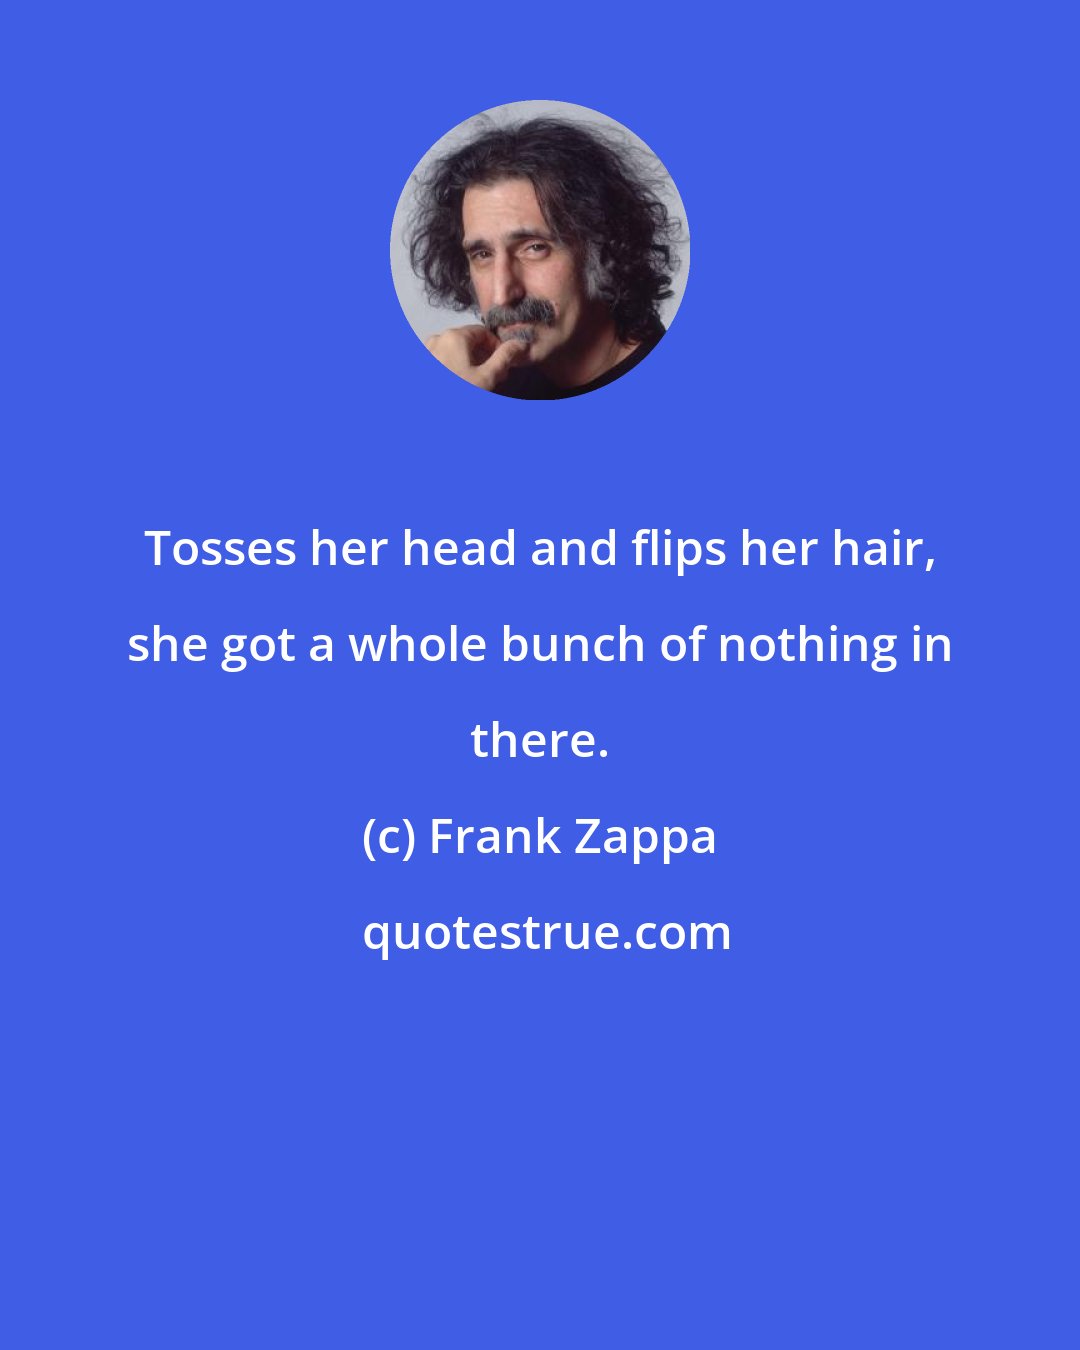 Frank Zappa: Tosses her head and flips her hair, she got a whole bunch of nothing in there.